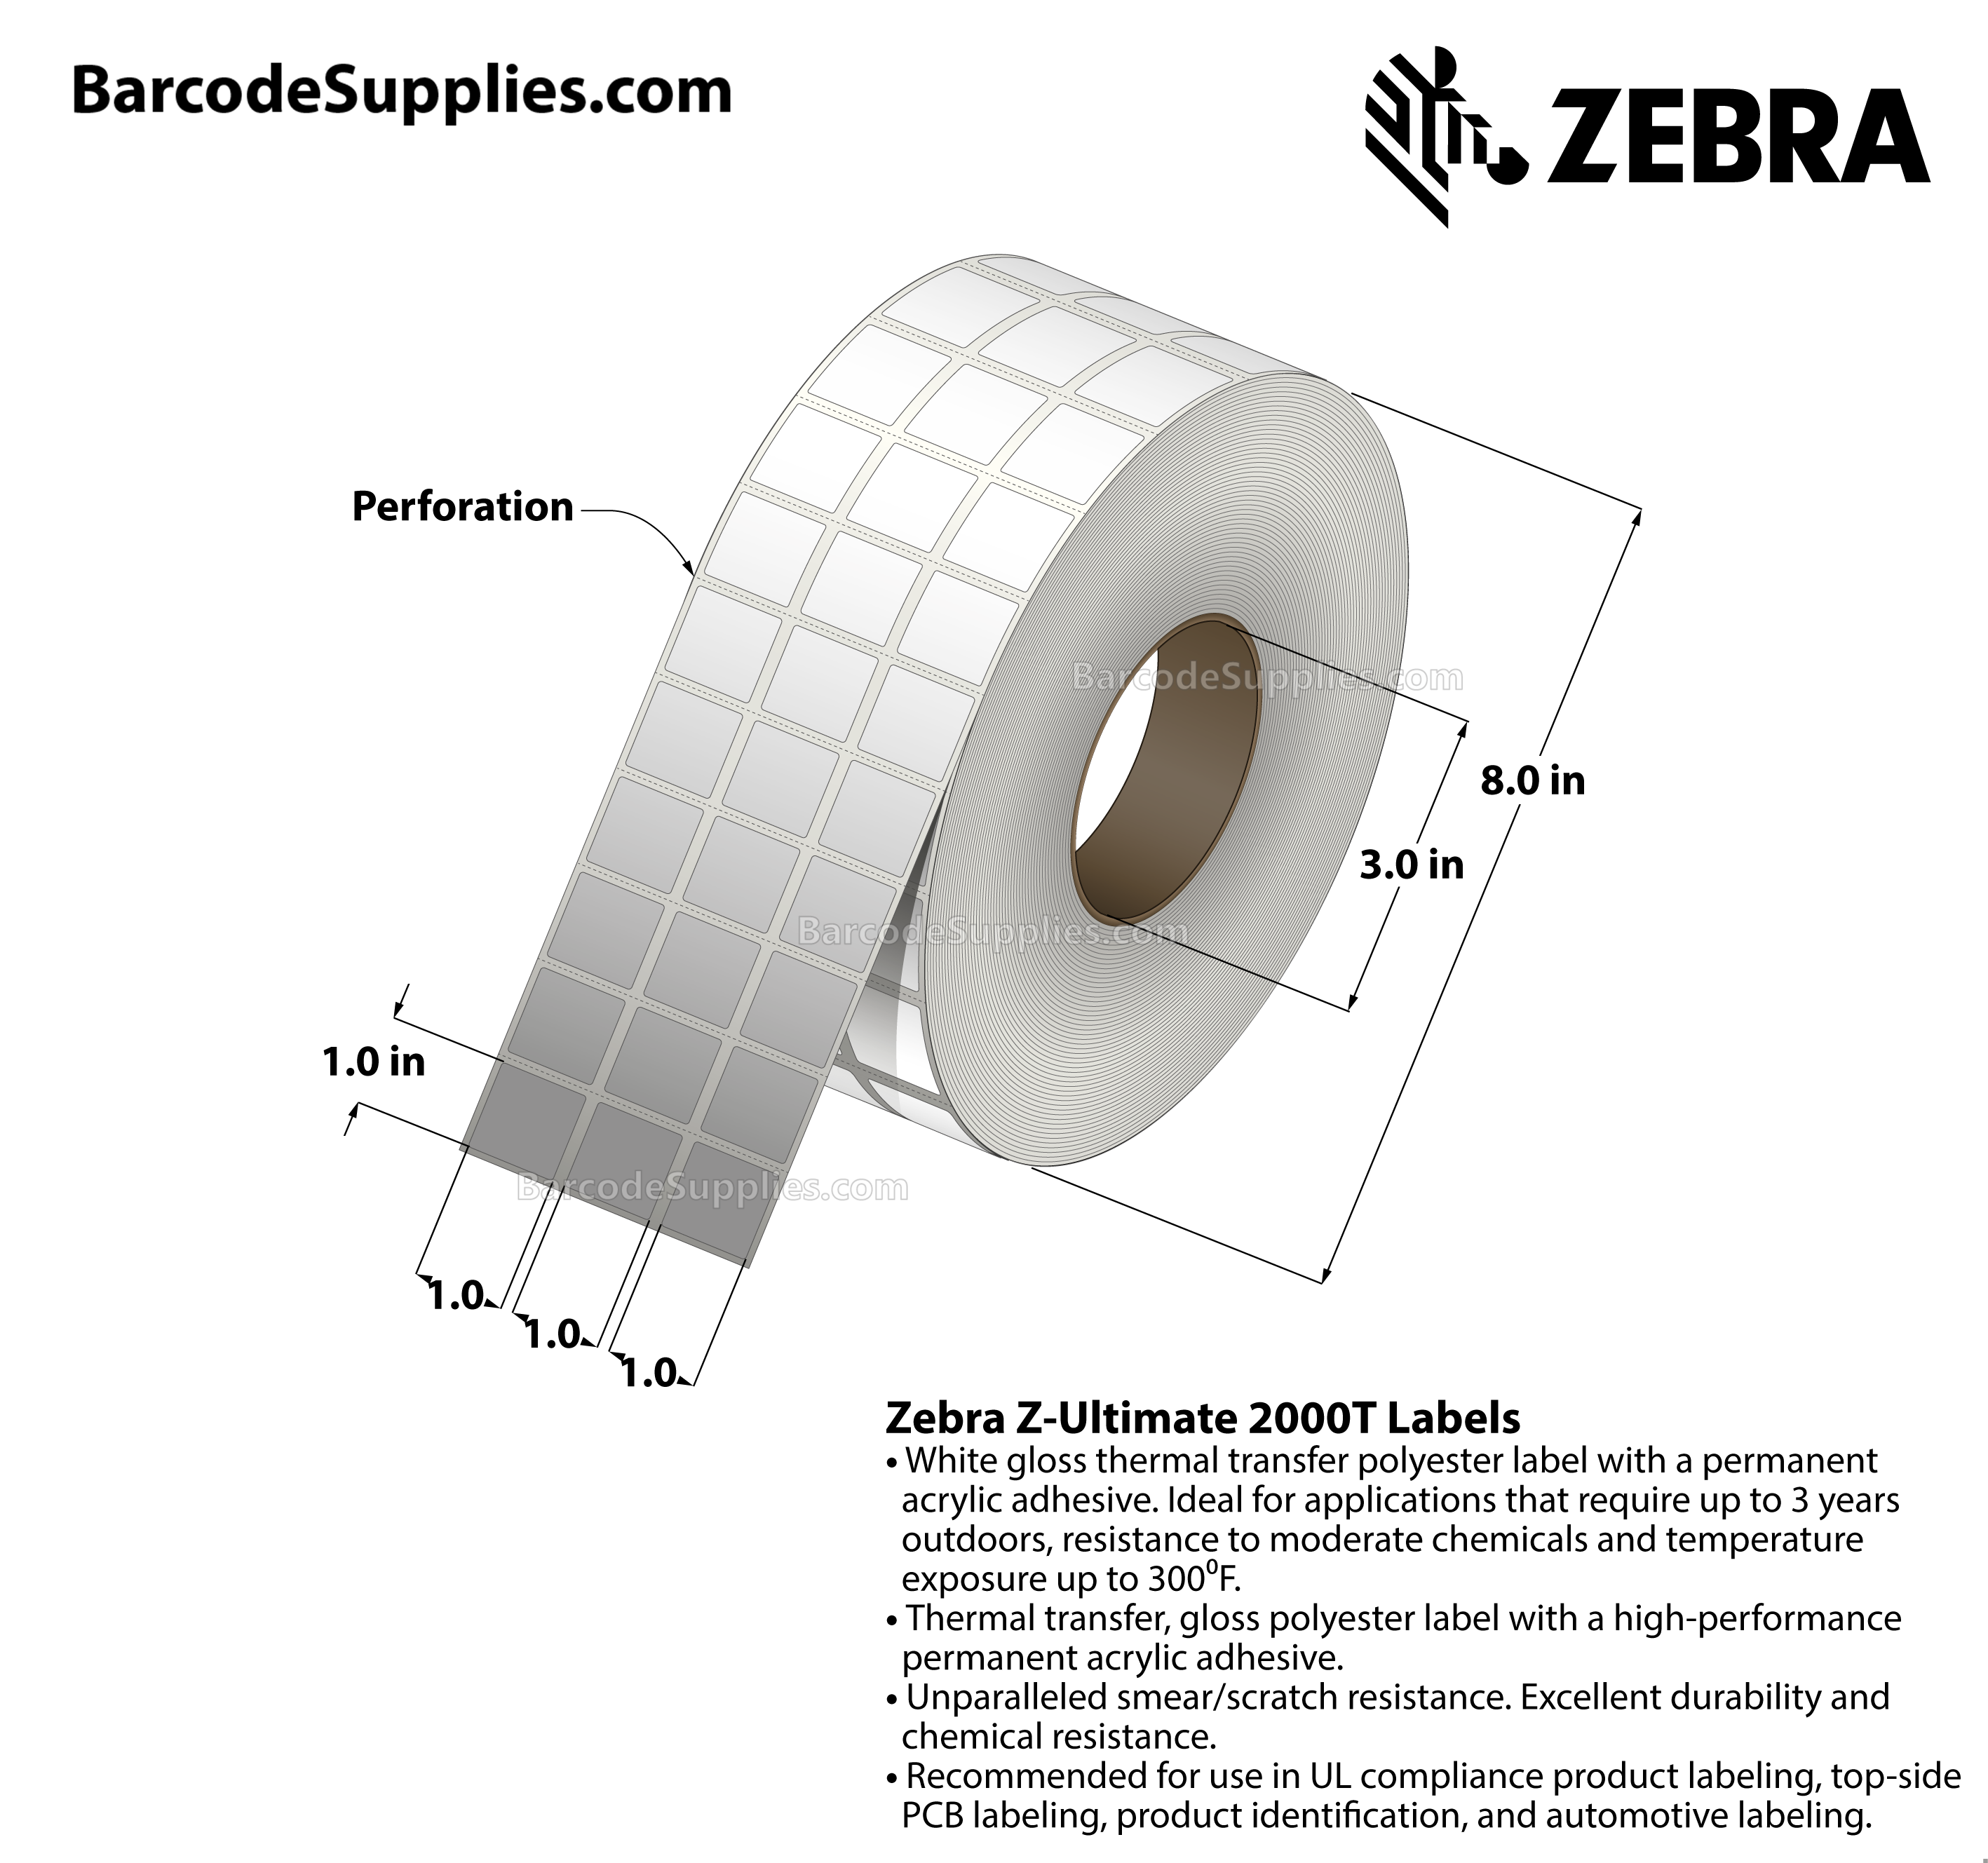 1 x 1 Thermal Transfer White Z-Ultimate 2000T (3-Across) Labels With Permanent Adhesive - Perforated - 16455 Labels Per Roll - Carton Of 4 Rolls - 65820 Labels Total - MPN: 10011977